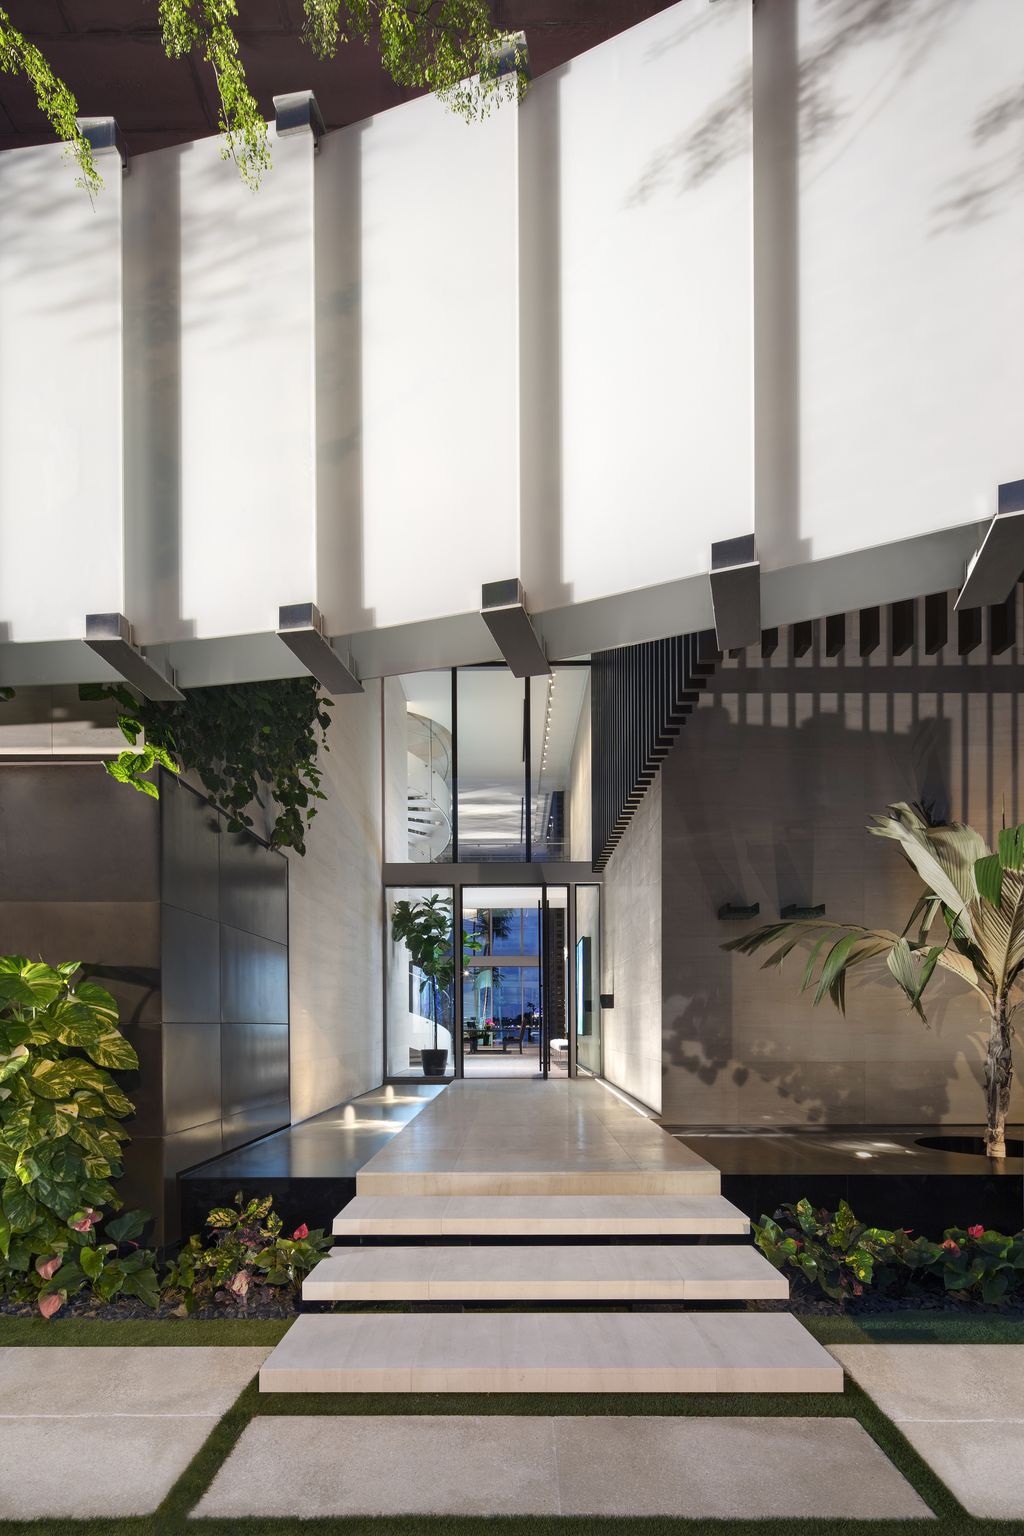 Dilido House, a Picturesque House Brings Sophistication to Miami’s Coast